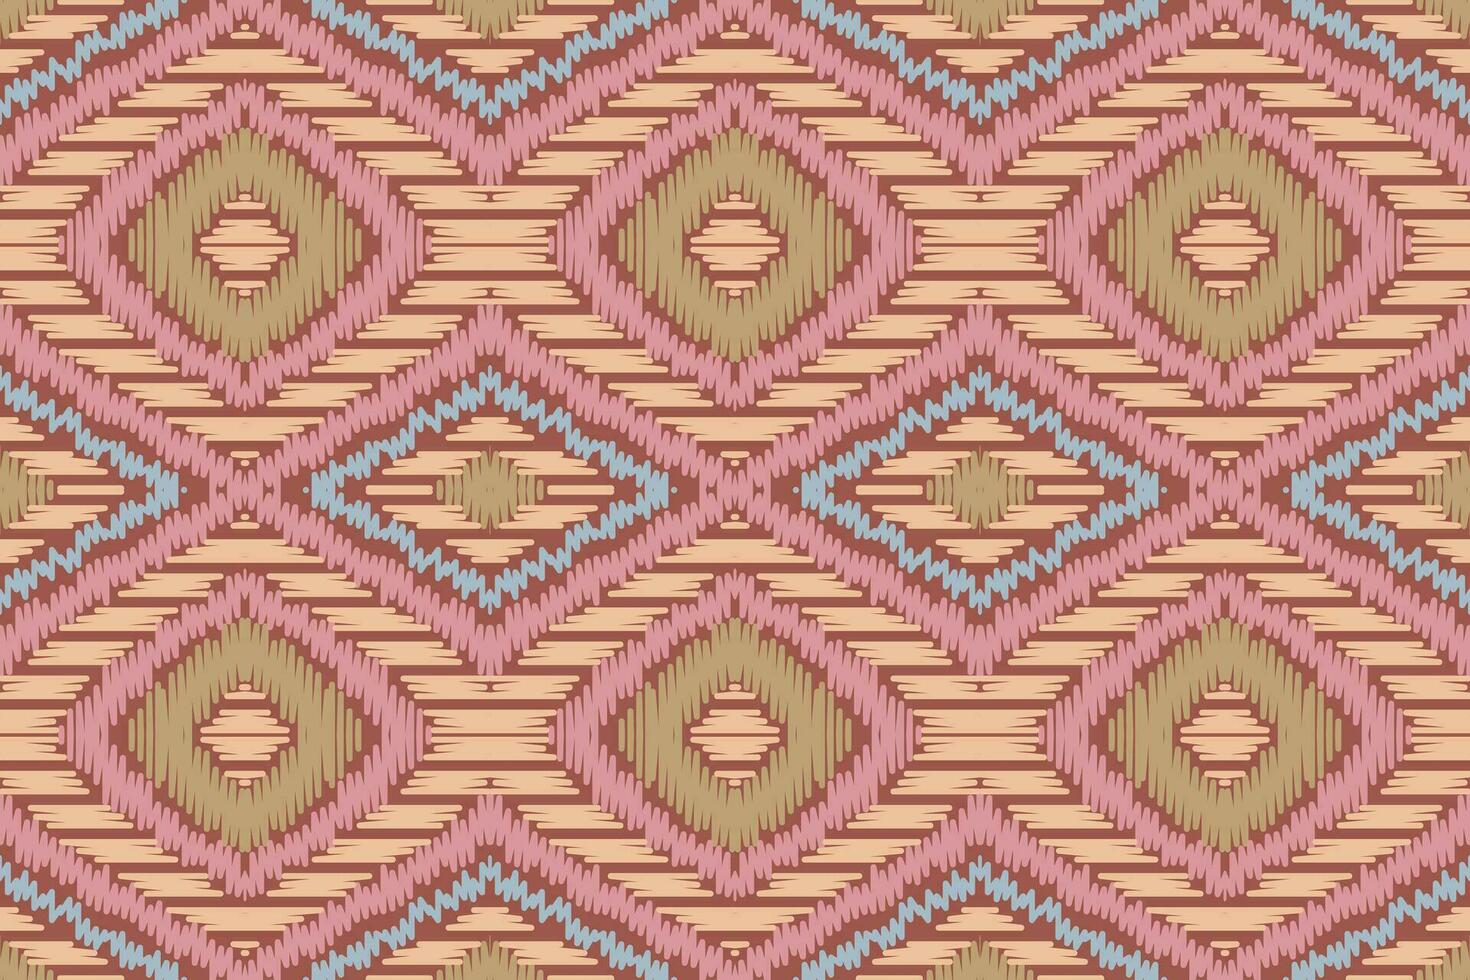 Ikat Damask Embroidery Background. Ikat Chevron Geometric Ethnic Oriental Pattern traditional.aztec Style Abstract Vector illustration.design for Texture,fabric,clothing,wrapping,sarong.